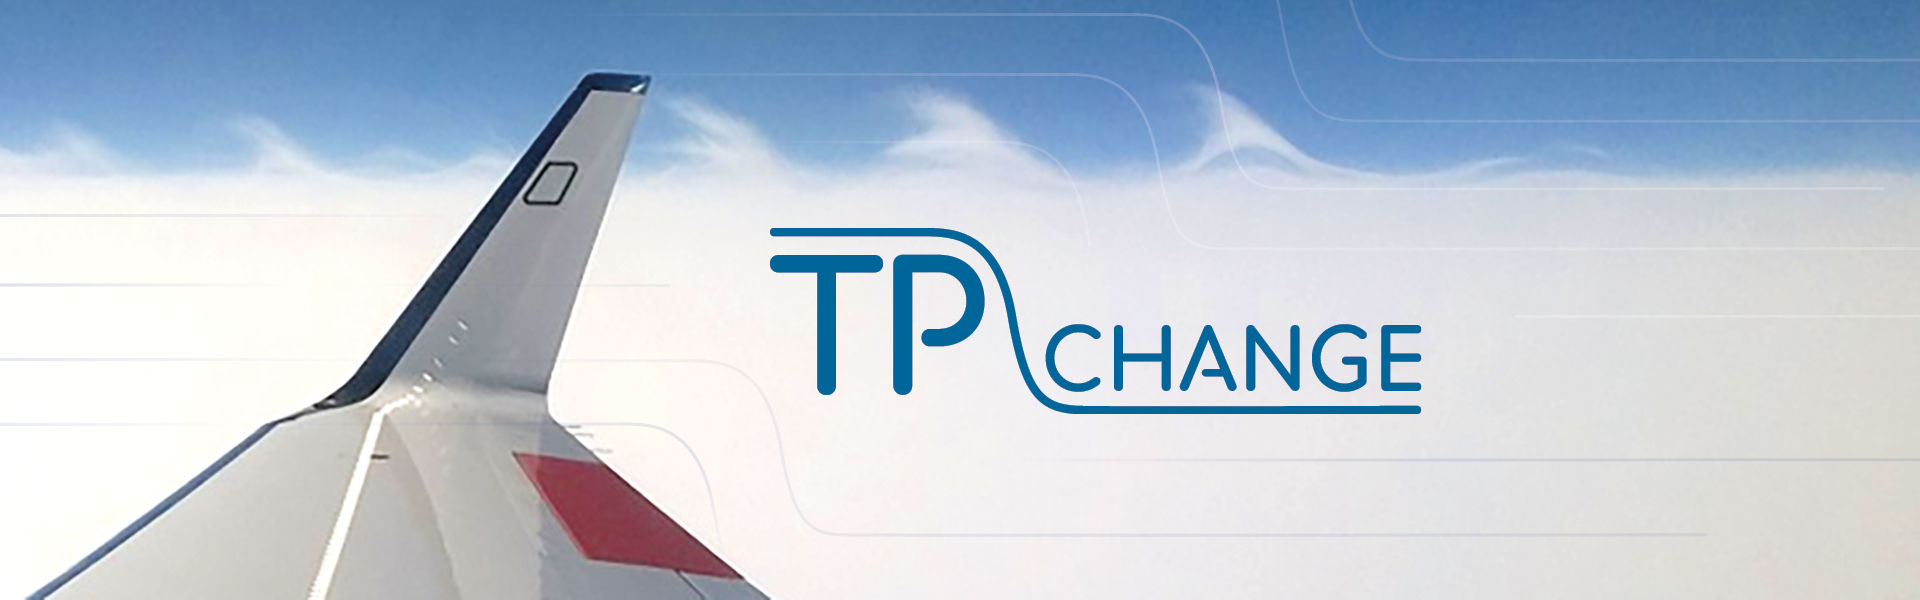 TPChange TRR 301 - The Tropopause Region in a Changing Atmosphere